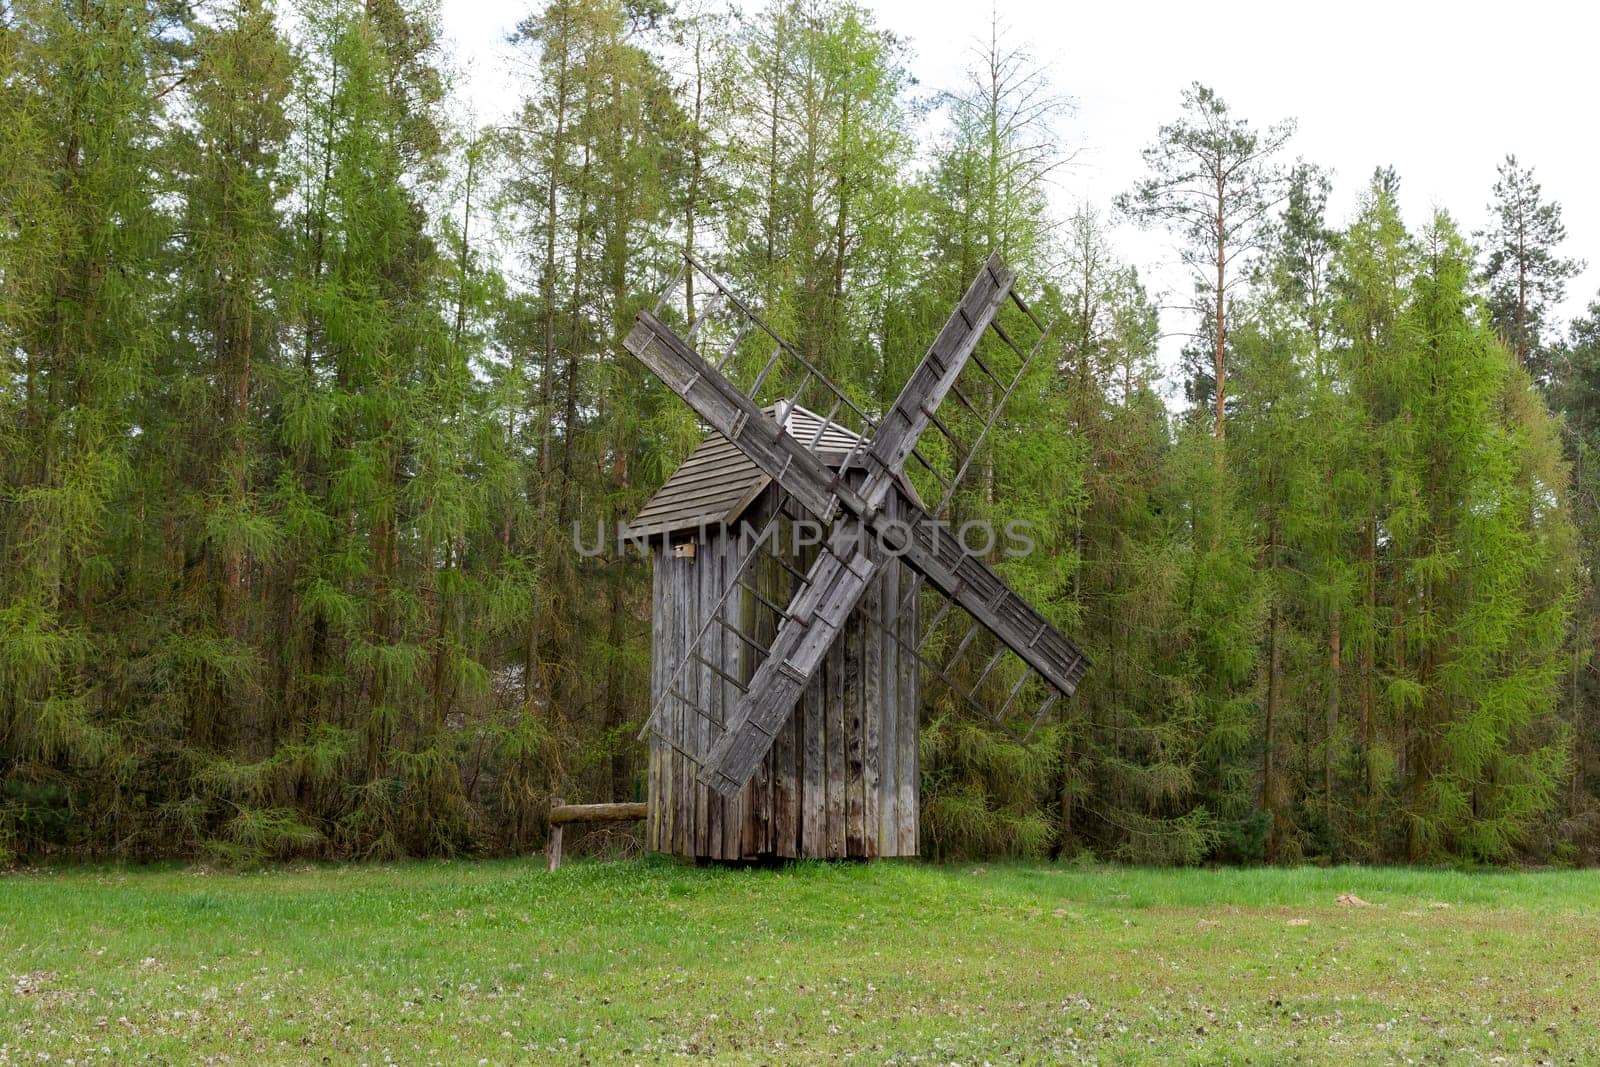 Old Wooden Mill In Meadow, Open Air. Blades Of Old Wooden Windmill In Rural Eastern Europe Area, Countryside. Green Forest On Background. Horizontal Landscape Plane High Quality Photo.